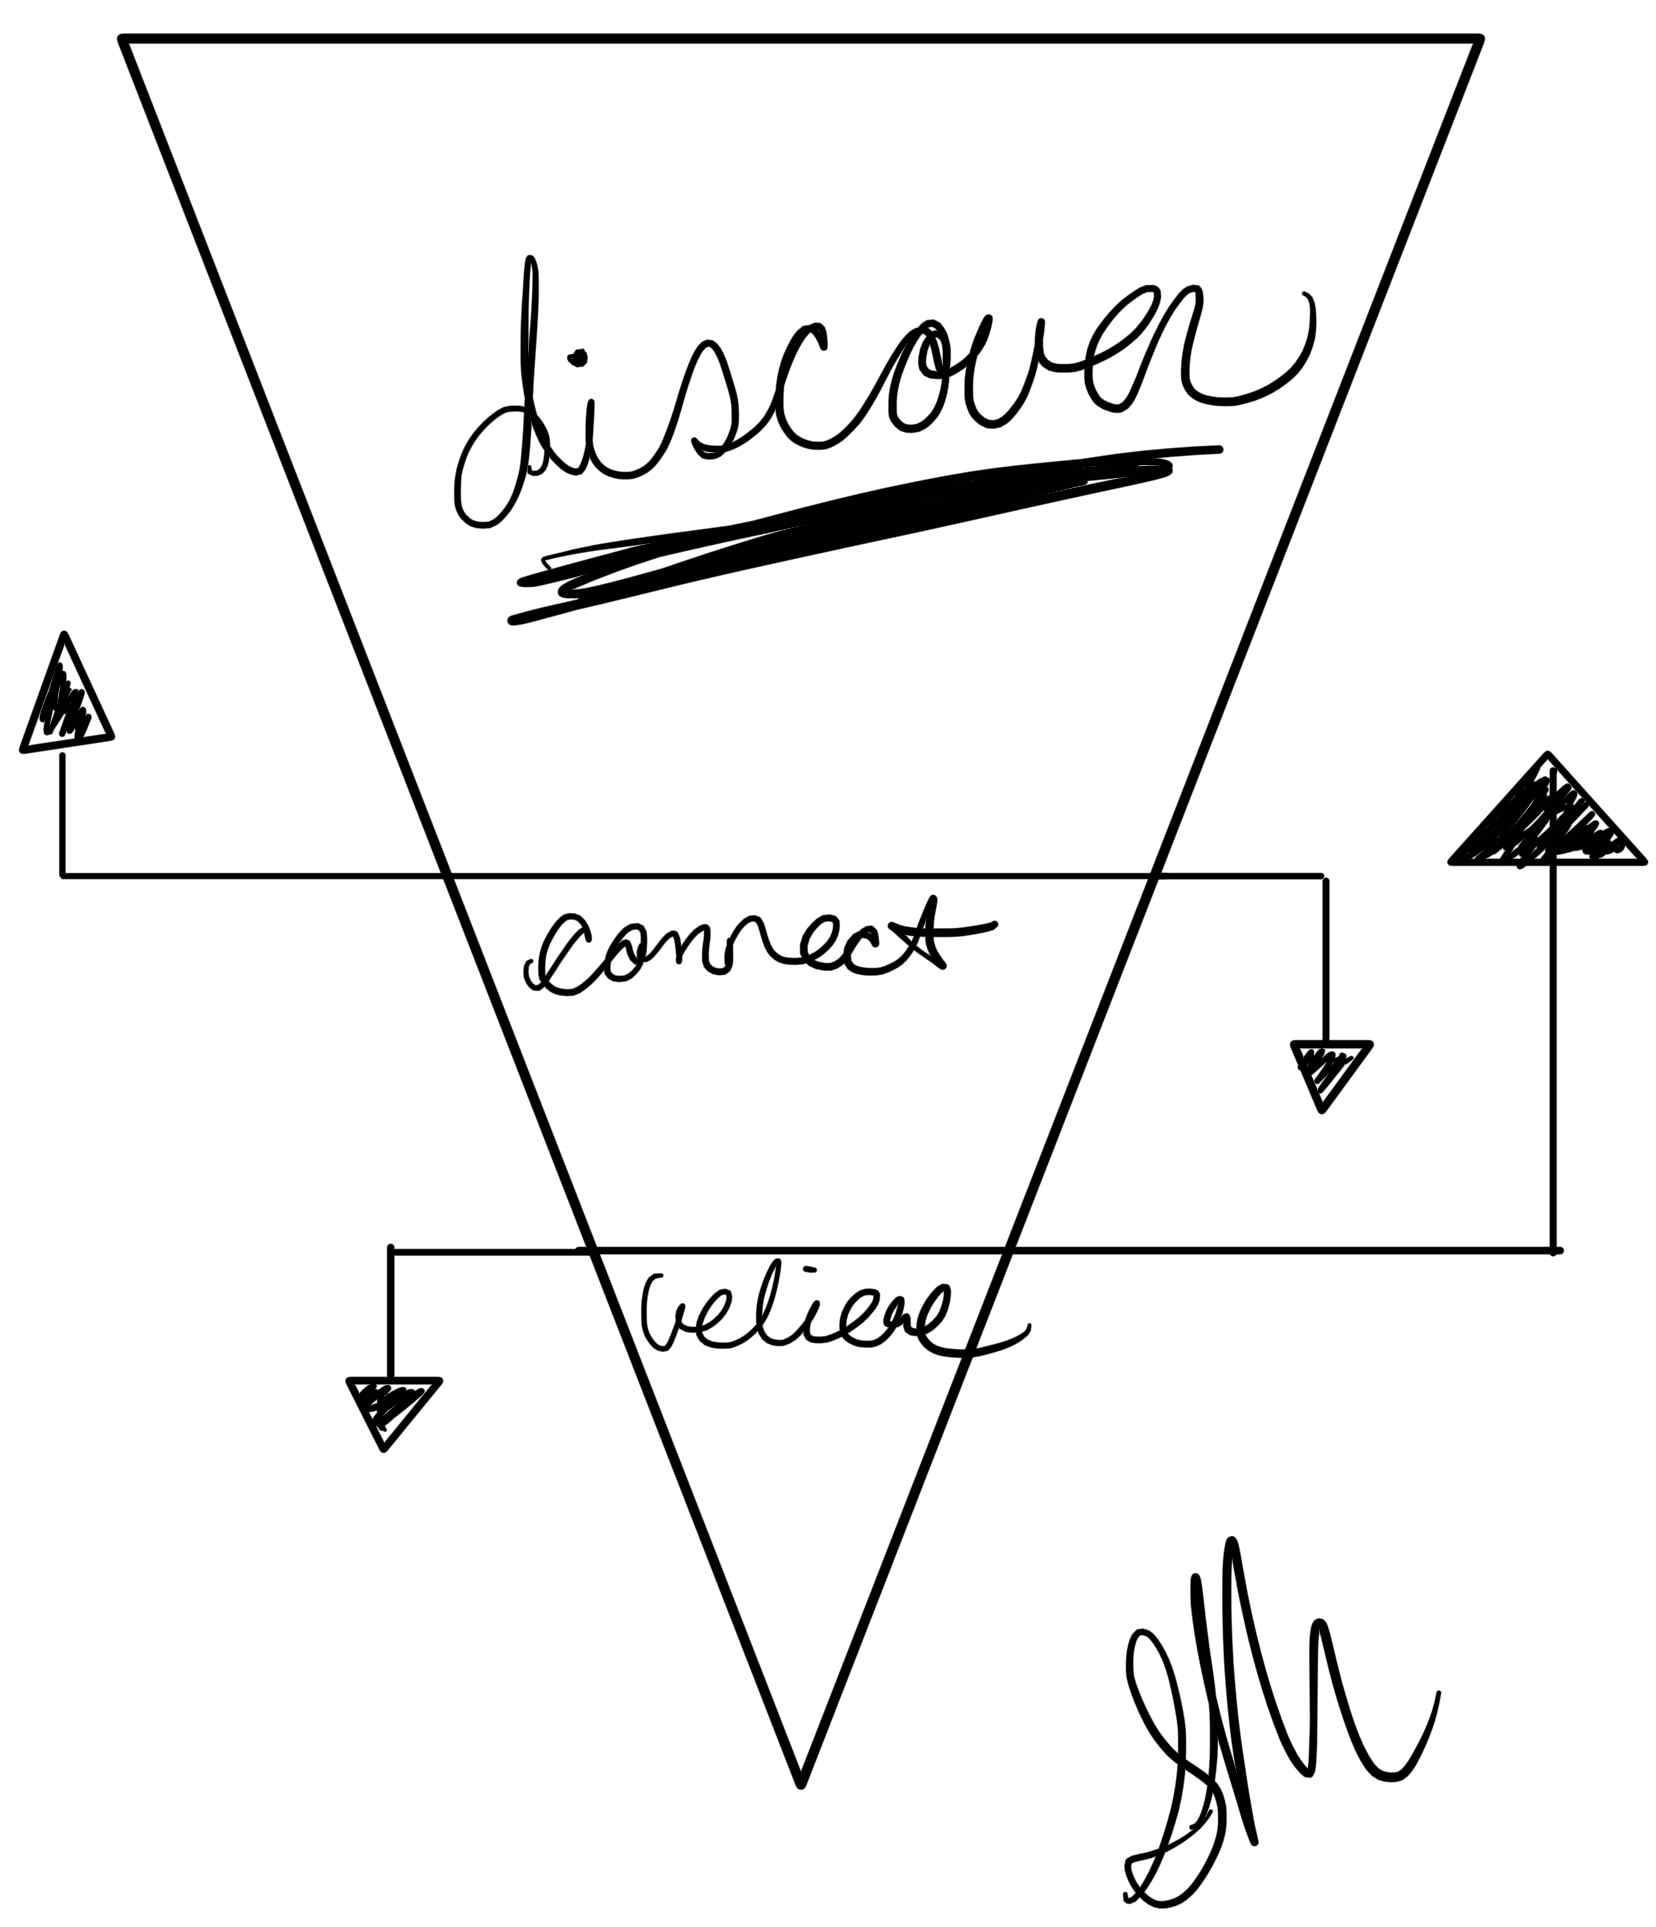 A sloppy but enthusiastic drawing of an inverted pyramid with Discover at the top, connect in the middle, believe at the bottom. There are exit arrows in the middle, illustrating how people leave this journey.